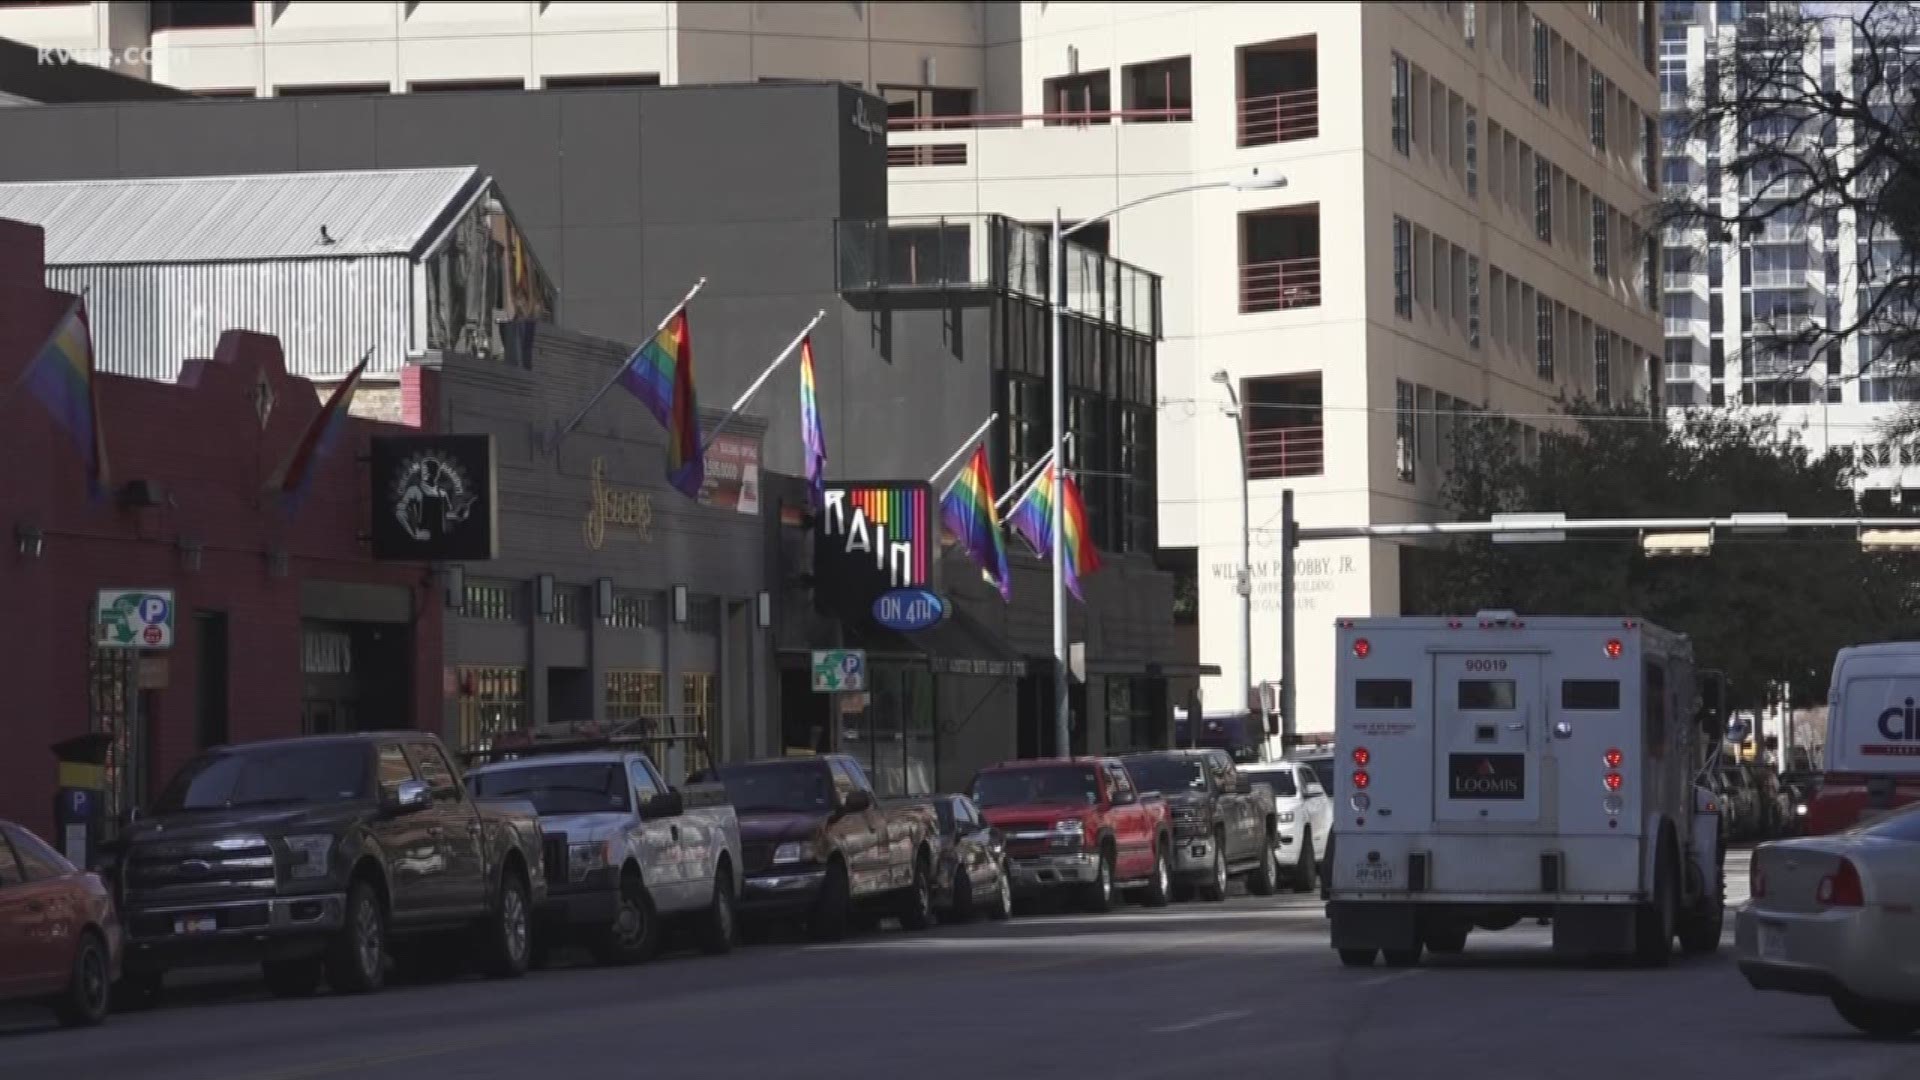 After an alleged attack left a gay couple beaten and bruised in Downtown Austin, a group of volunteers is trying to make the Fourth Street area safer.